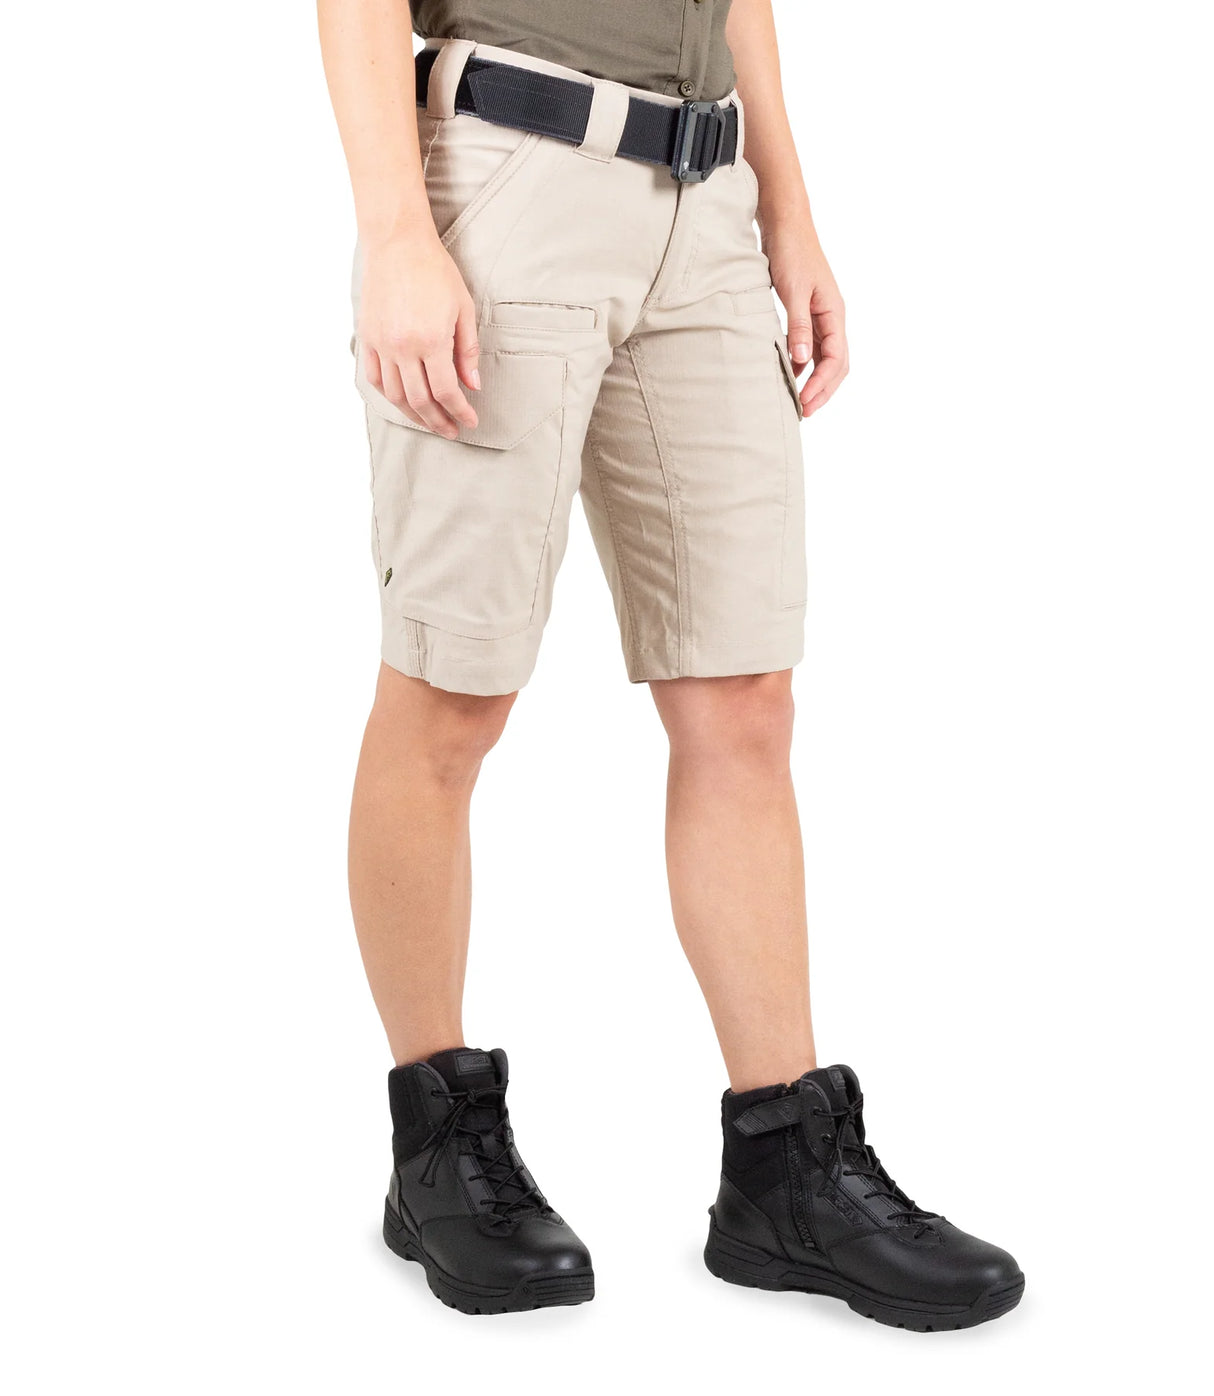 First Tactical Women's V2 Tactical Shorts